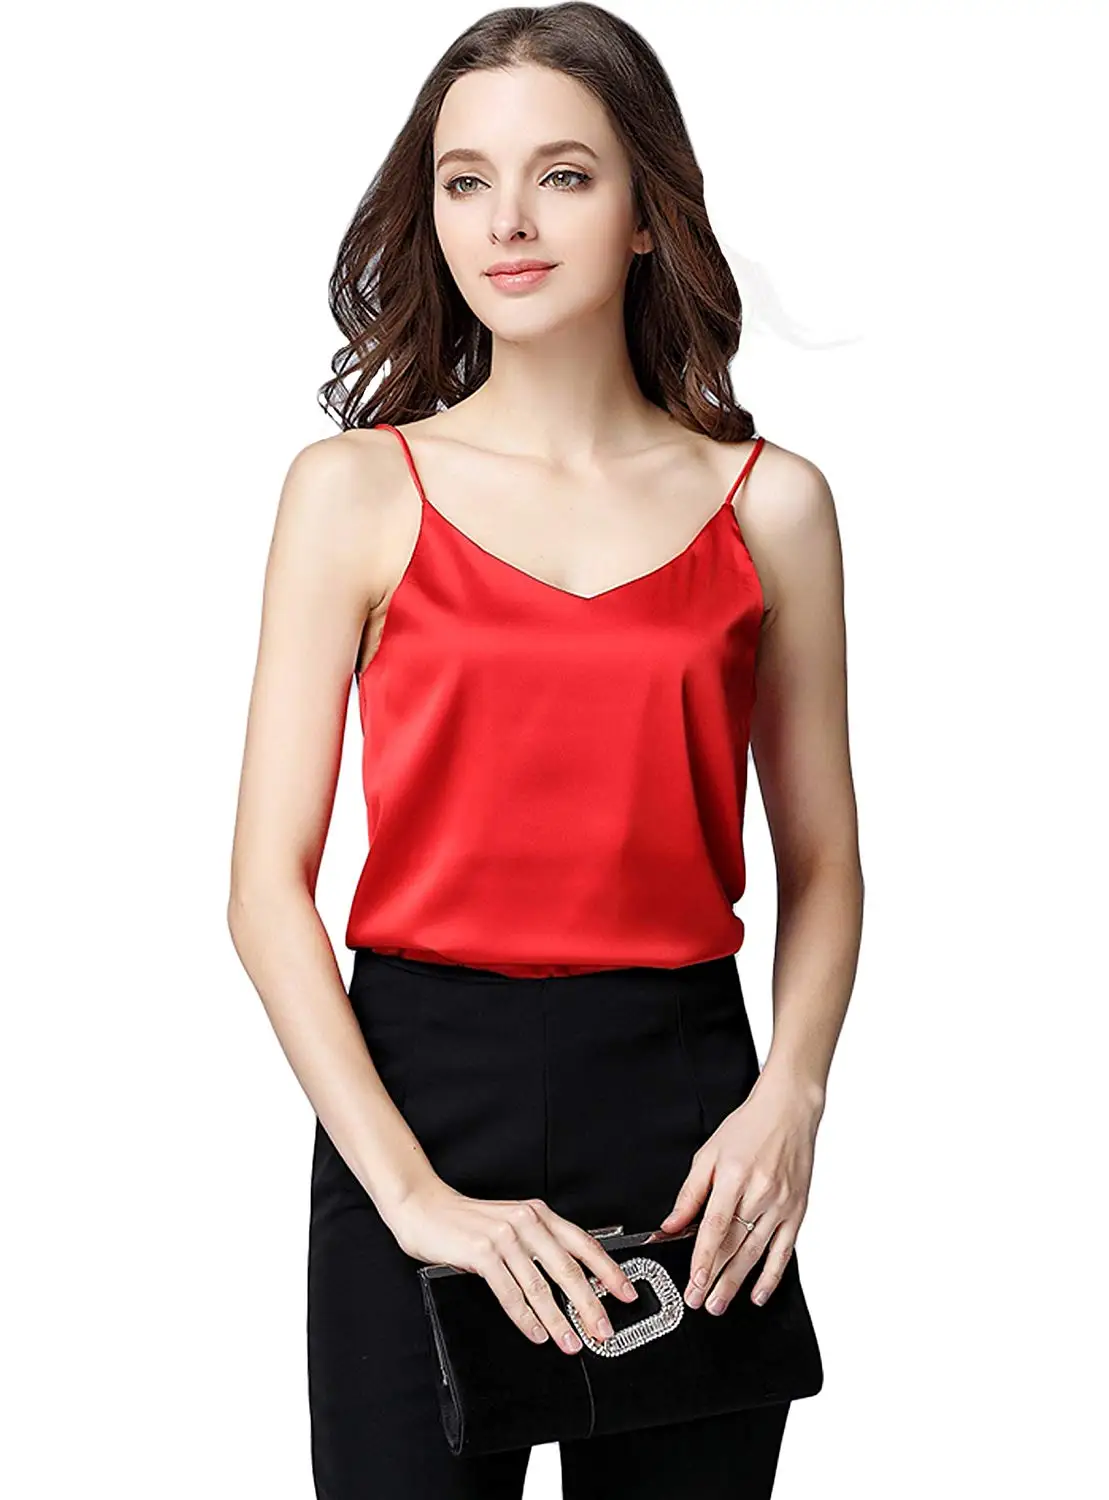 Cheap Silk Cami Tops Uk, find Silk Cami Tops Uk deals on line at ...